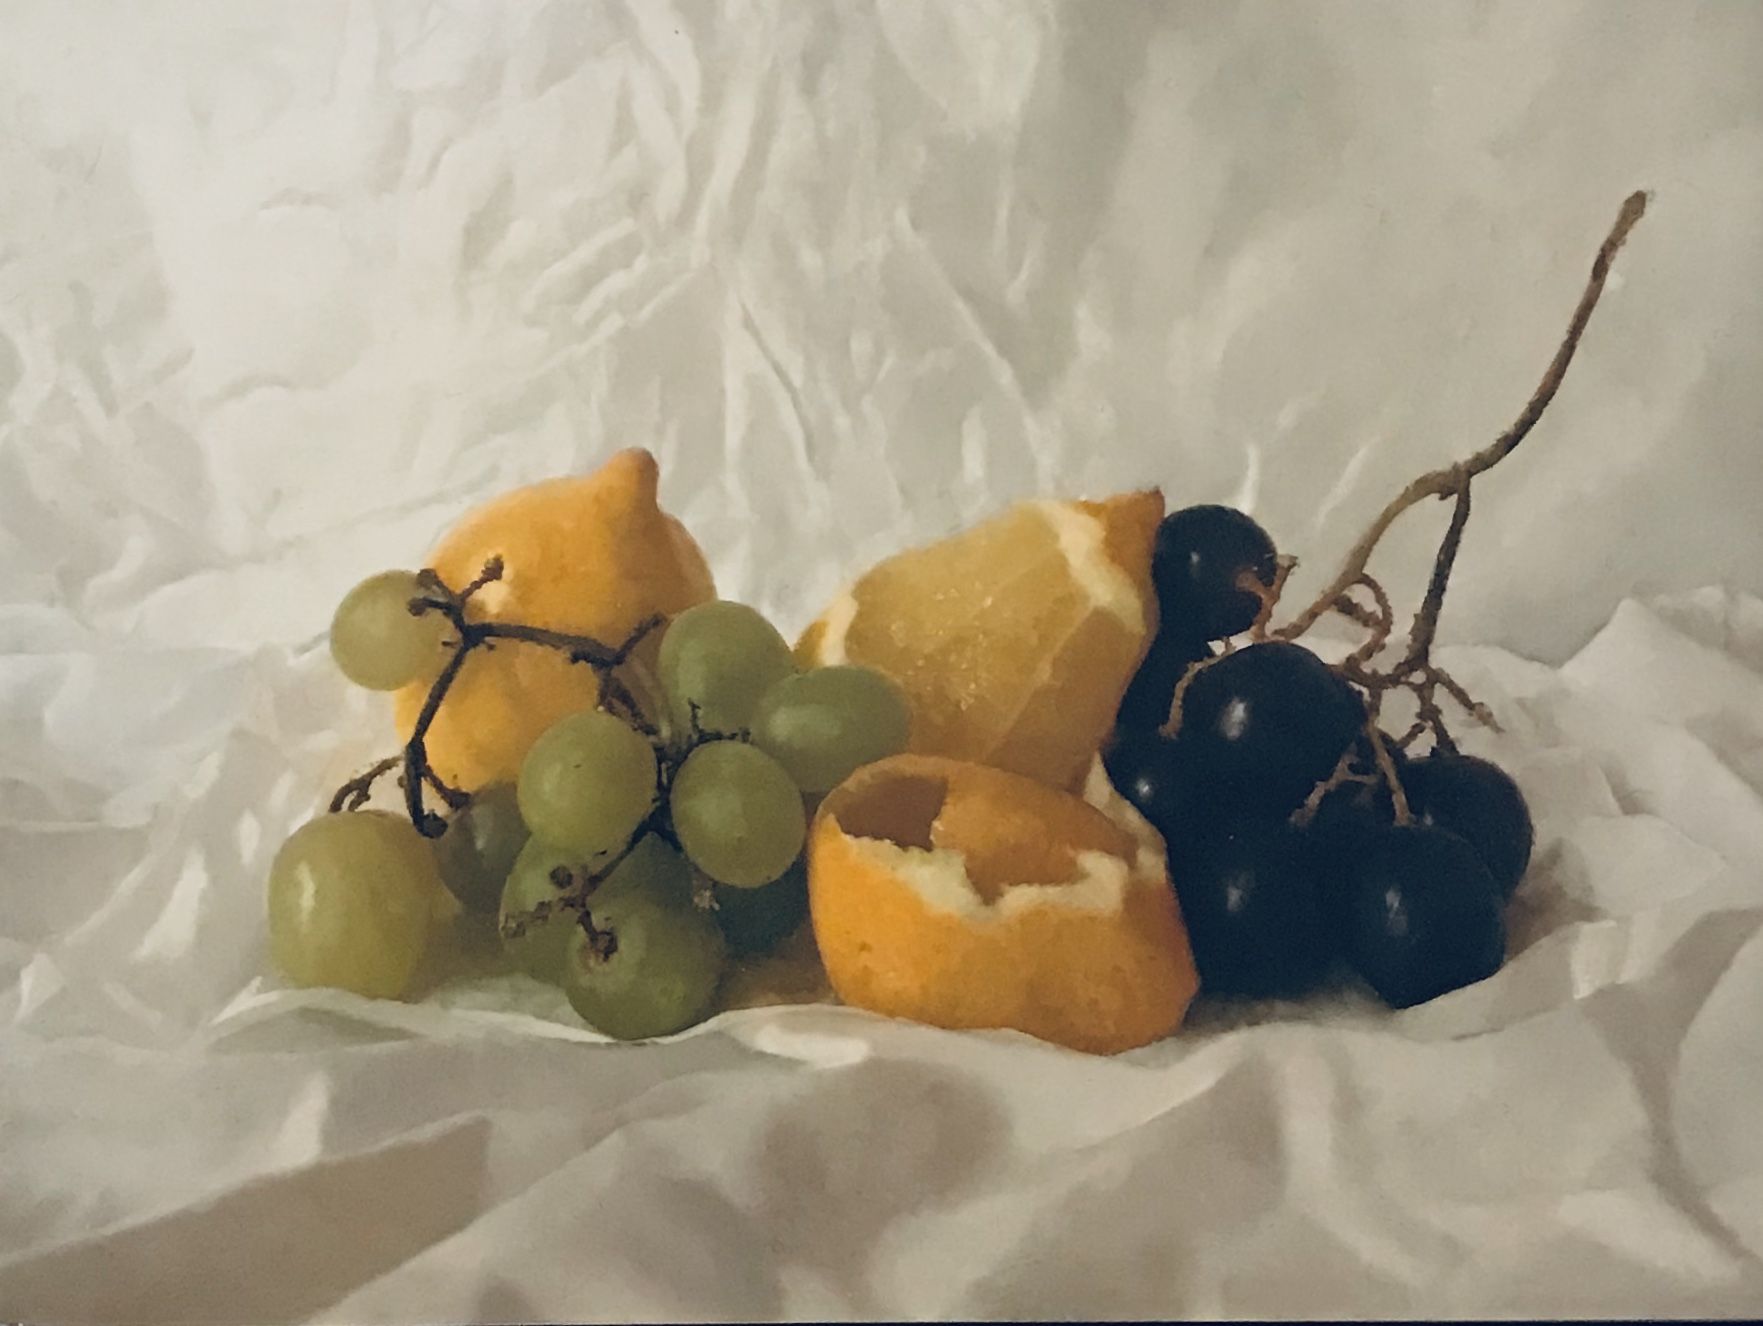 Grapes and Lemon by Kate Verrion